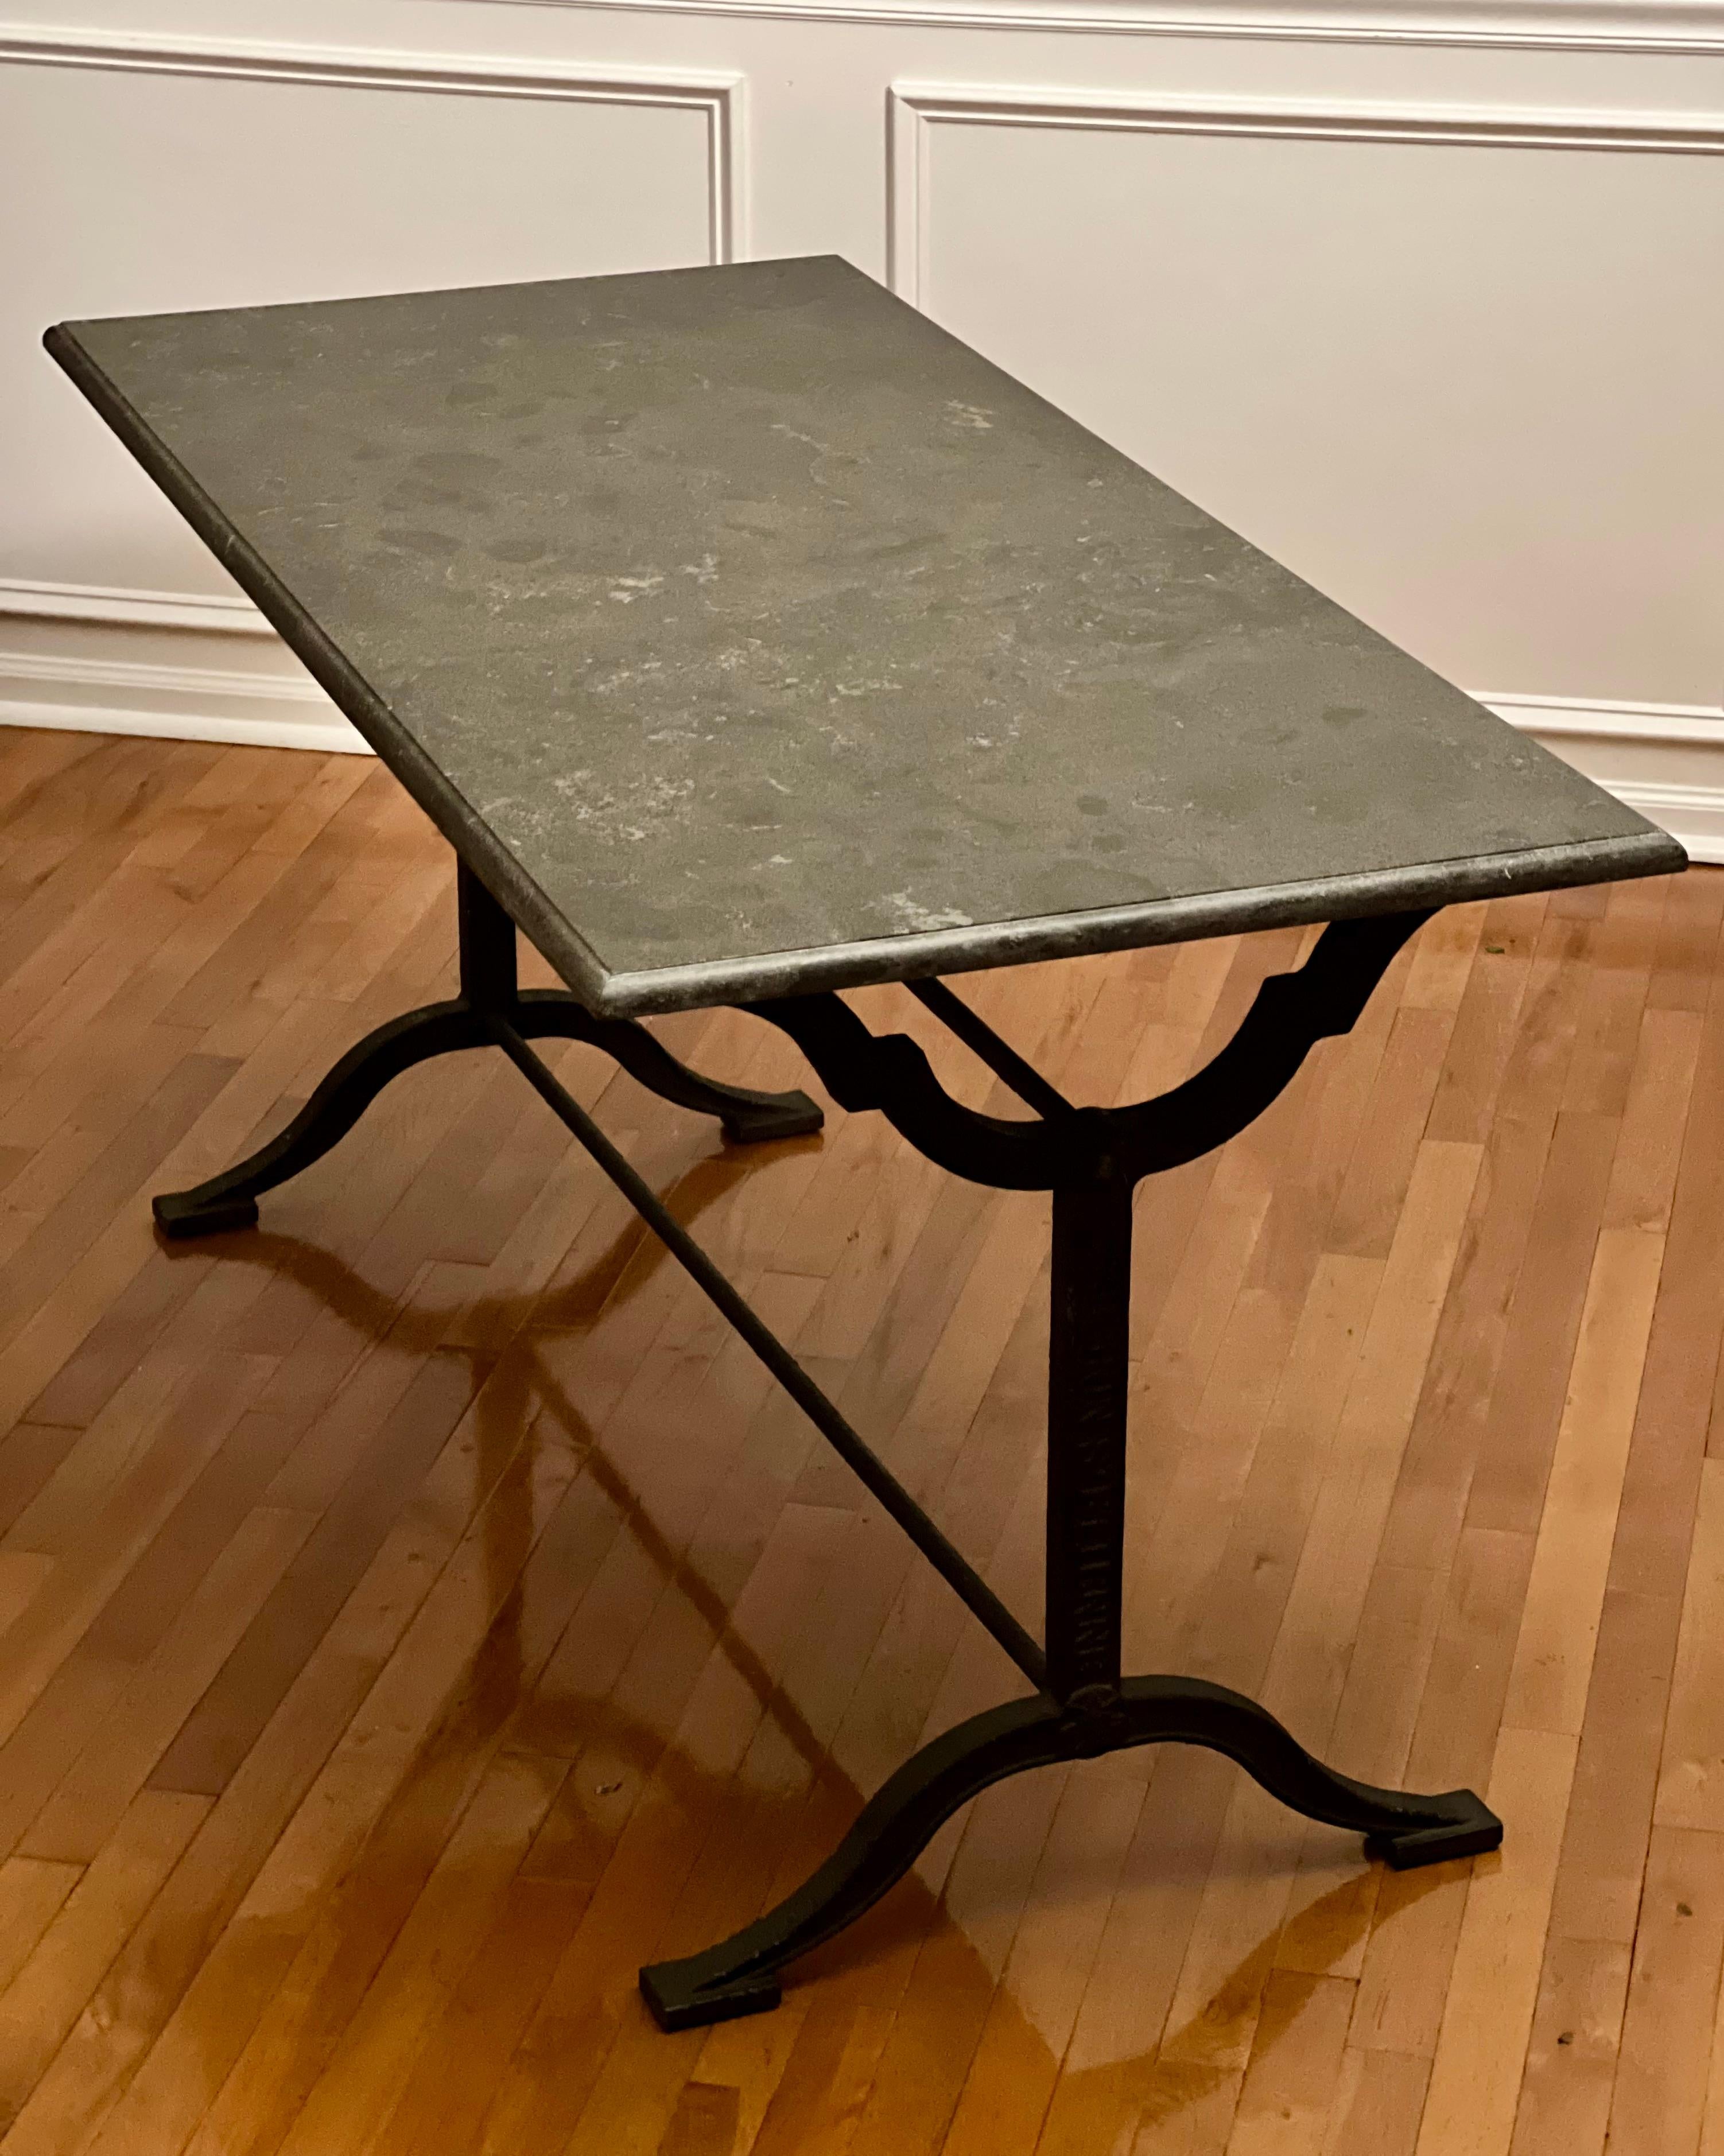 Classic style long French bistro or garden table with iron base and dark gray stone top by L. Buchon, France, c. 1900.

This is a fantastic table with beauty and great versatility. An excellent size for dining but may also be used as a desk,